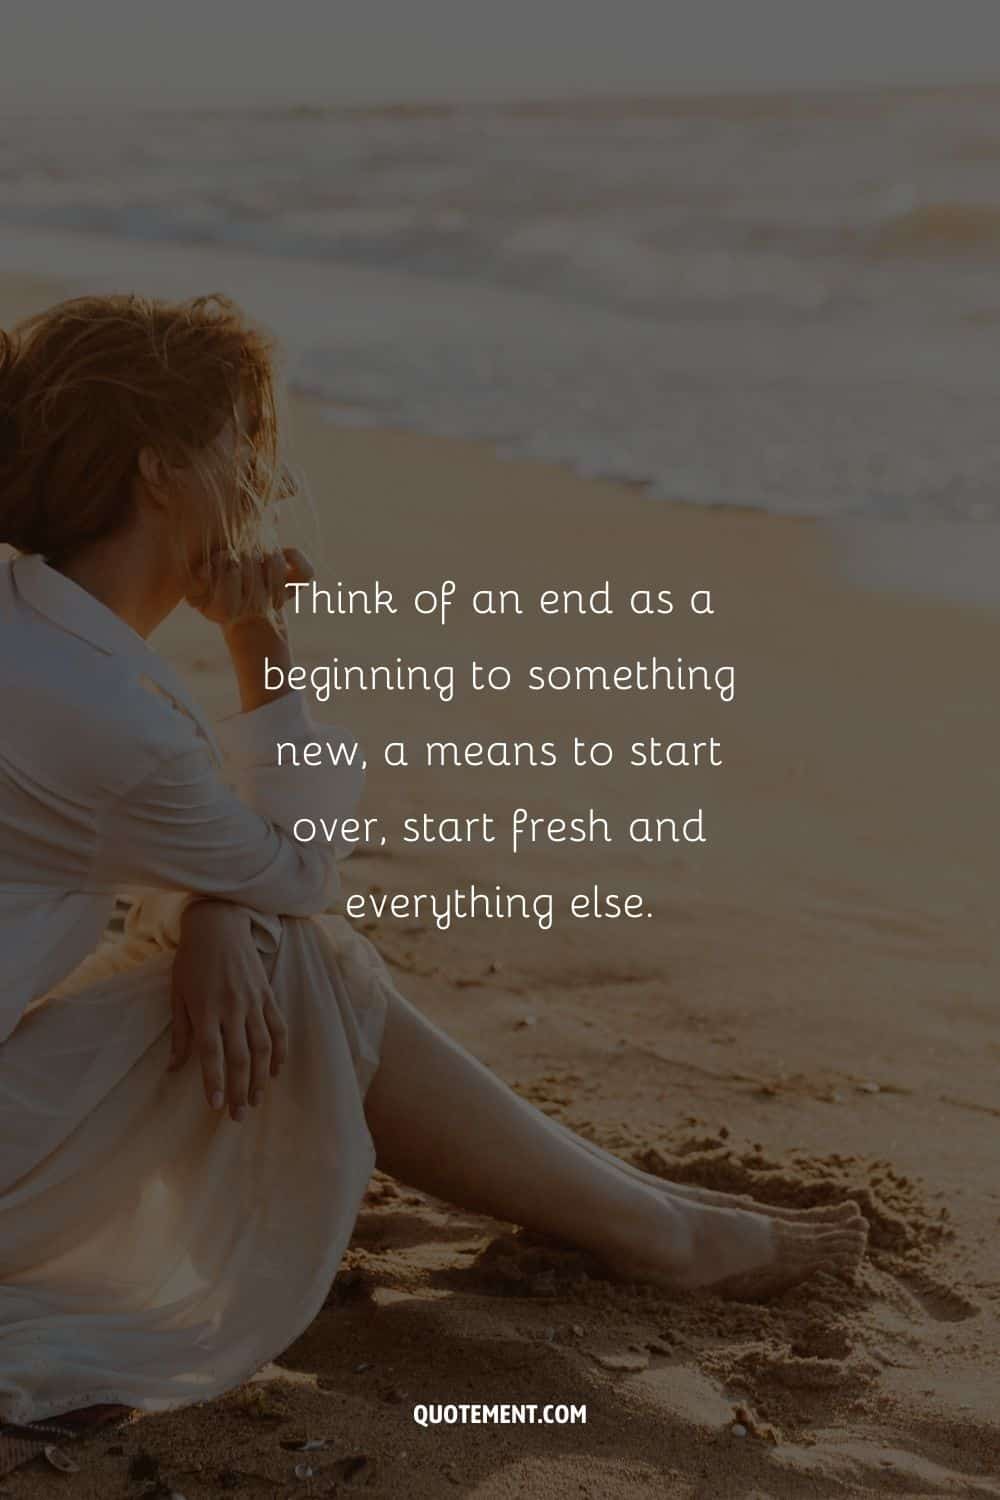 “Think of an end as a beginning to something new, a means to start over, start fresh and everything else.” — Unknown